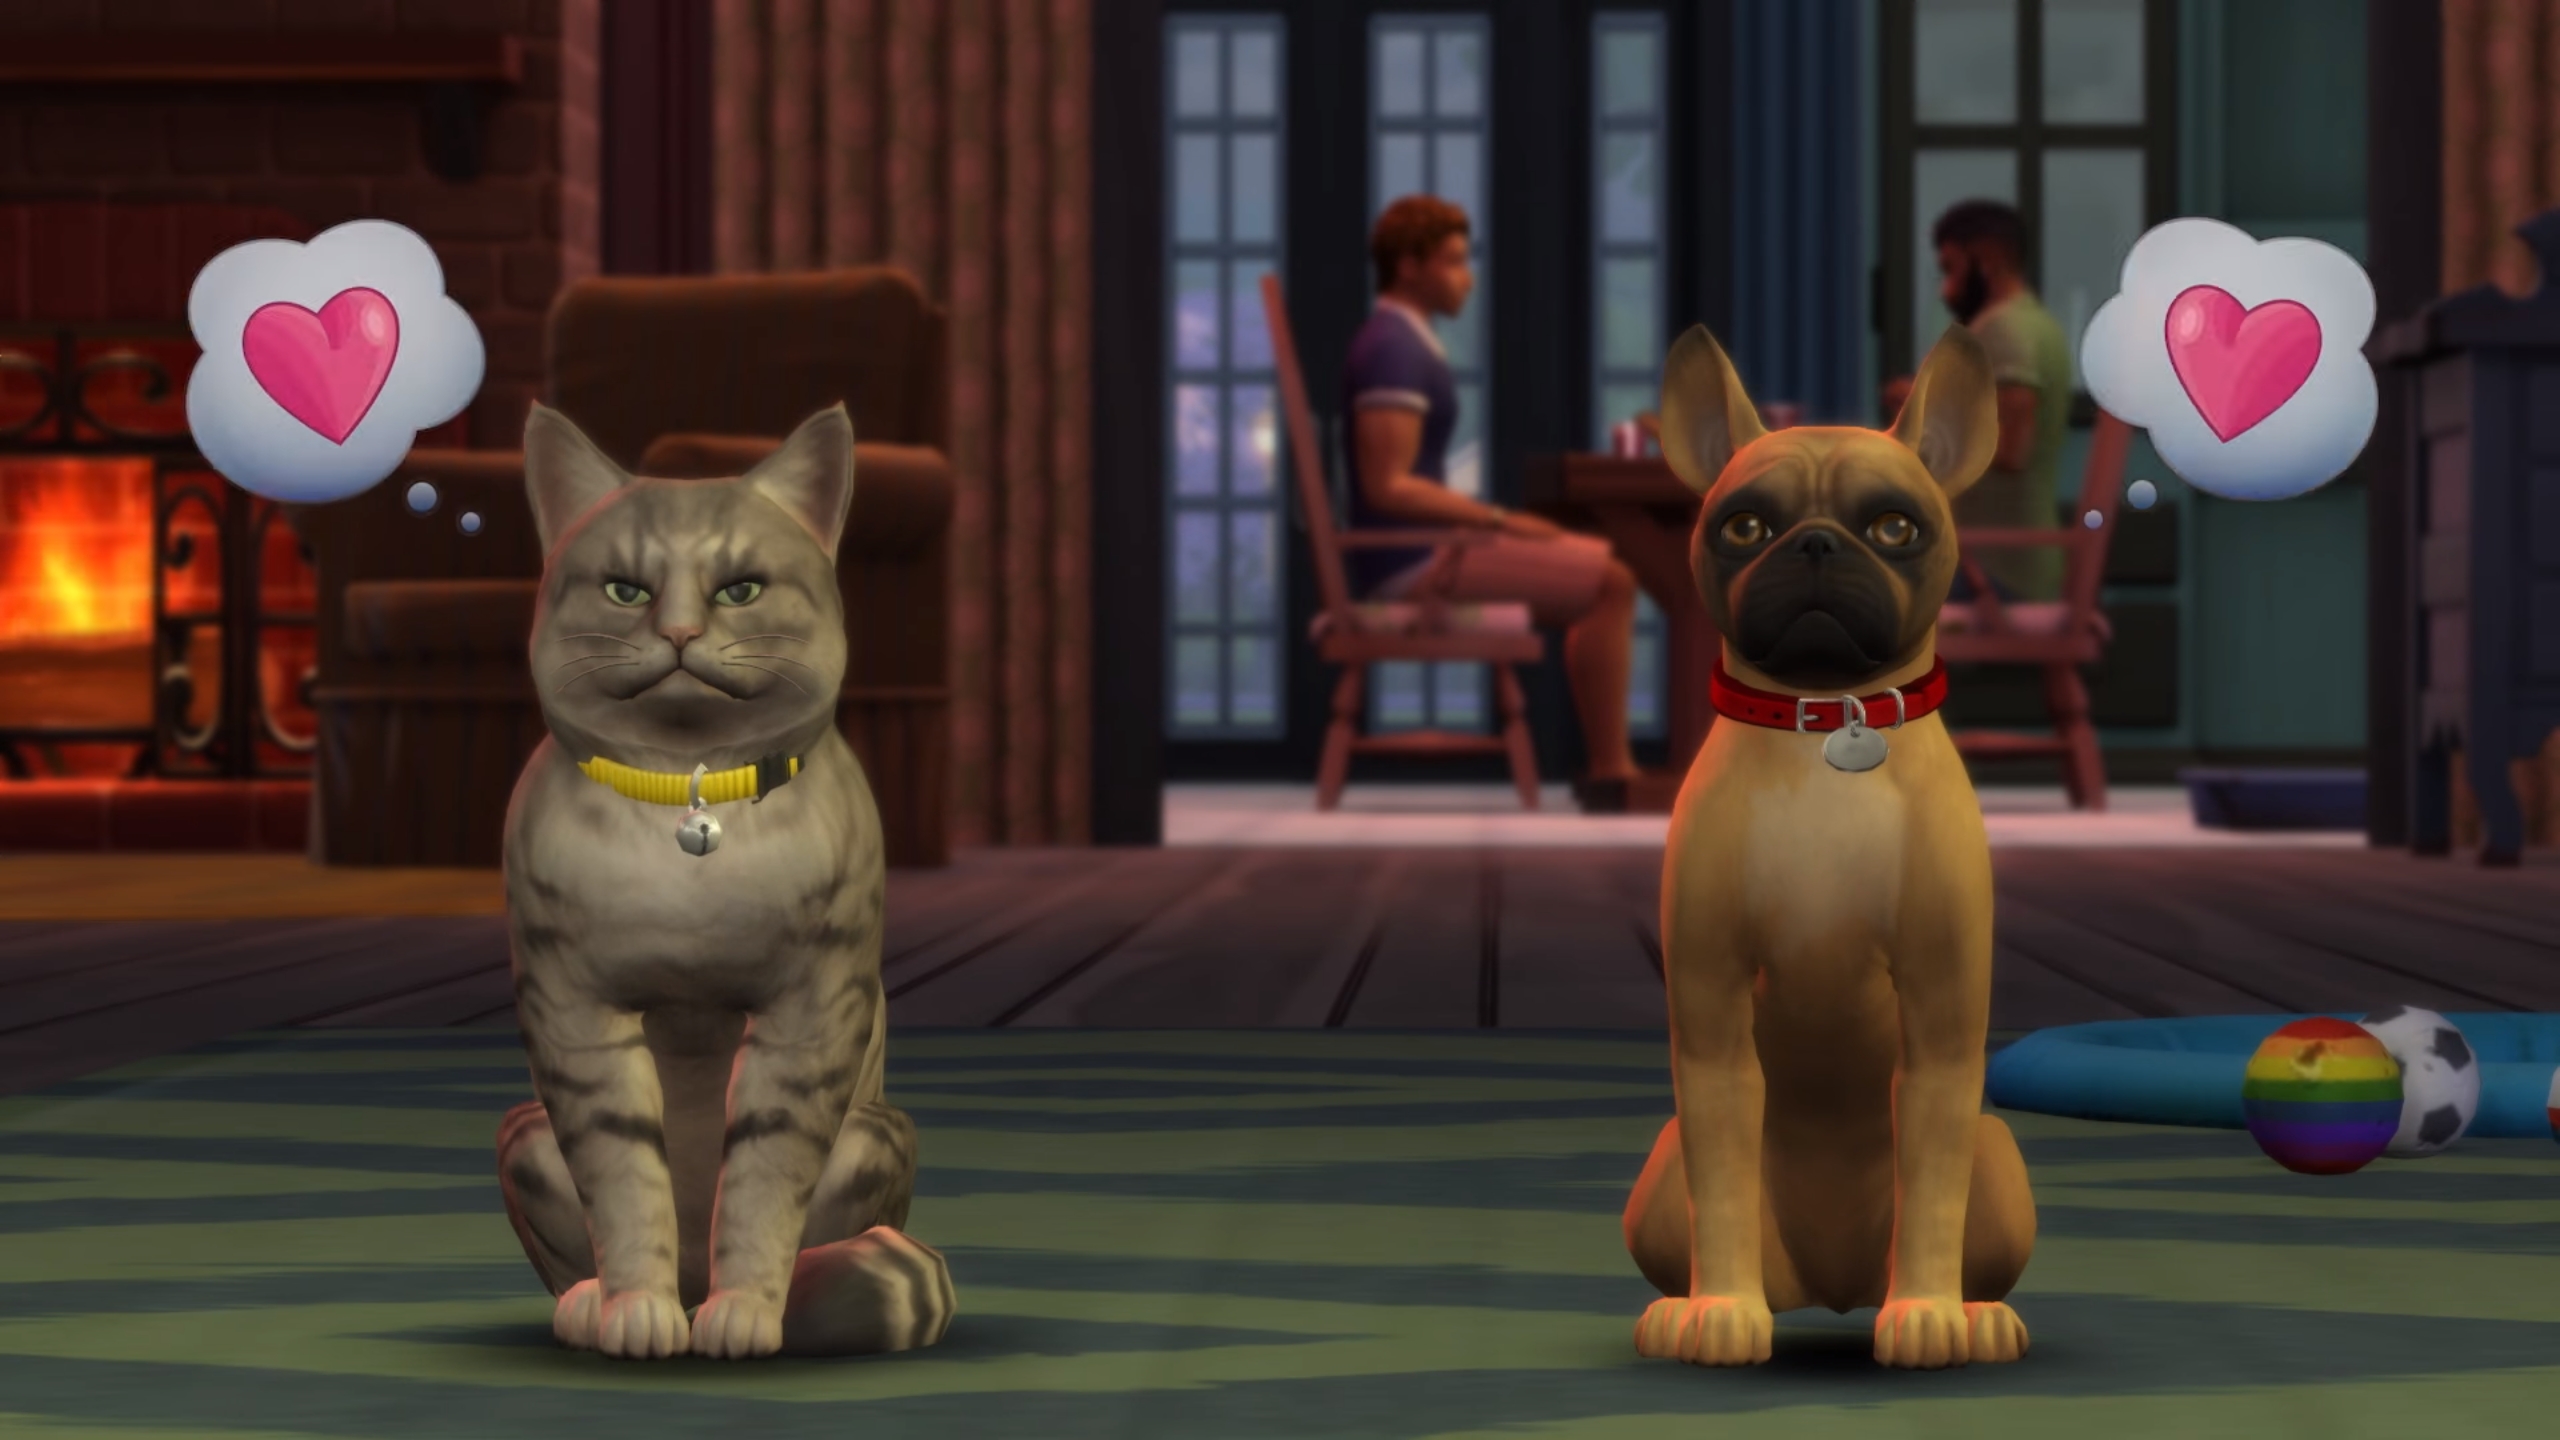 sims 4 dogs and cats expansion pack